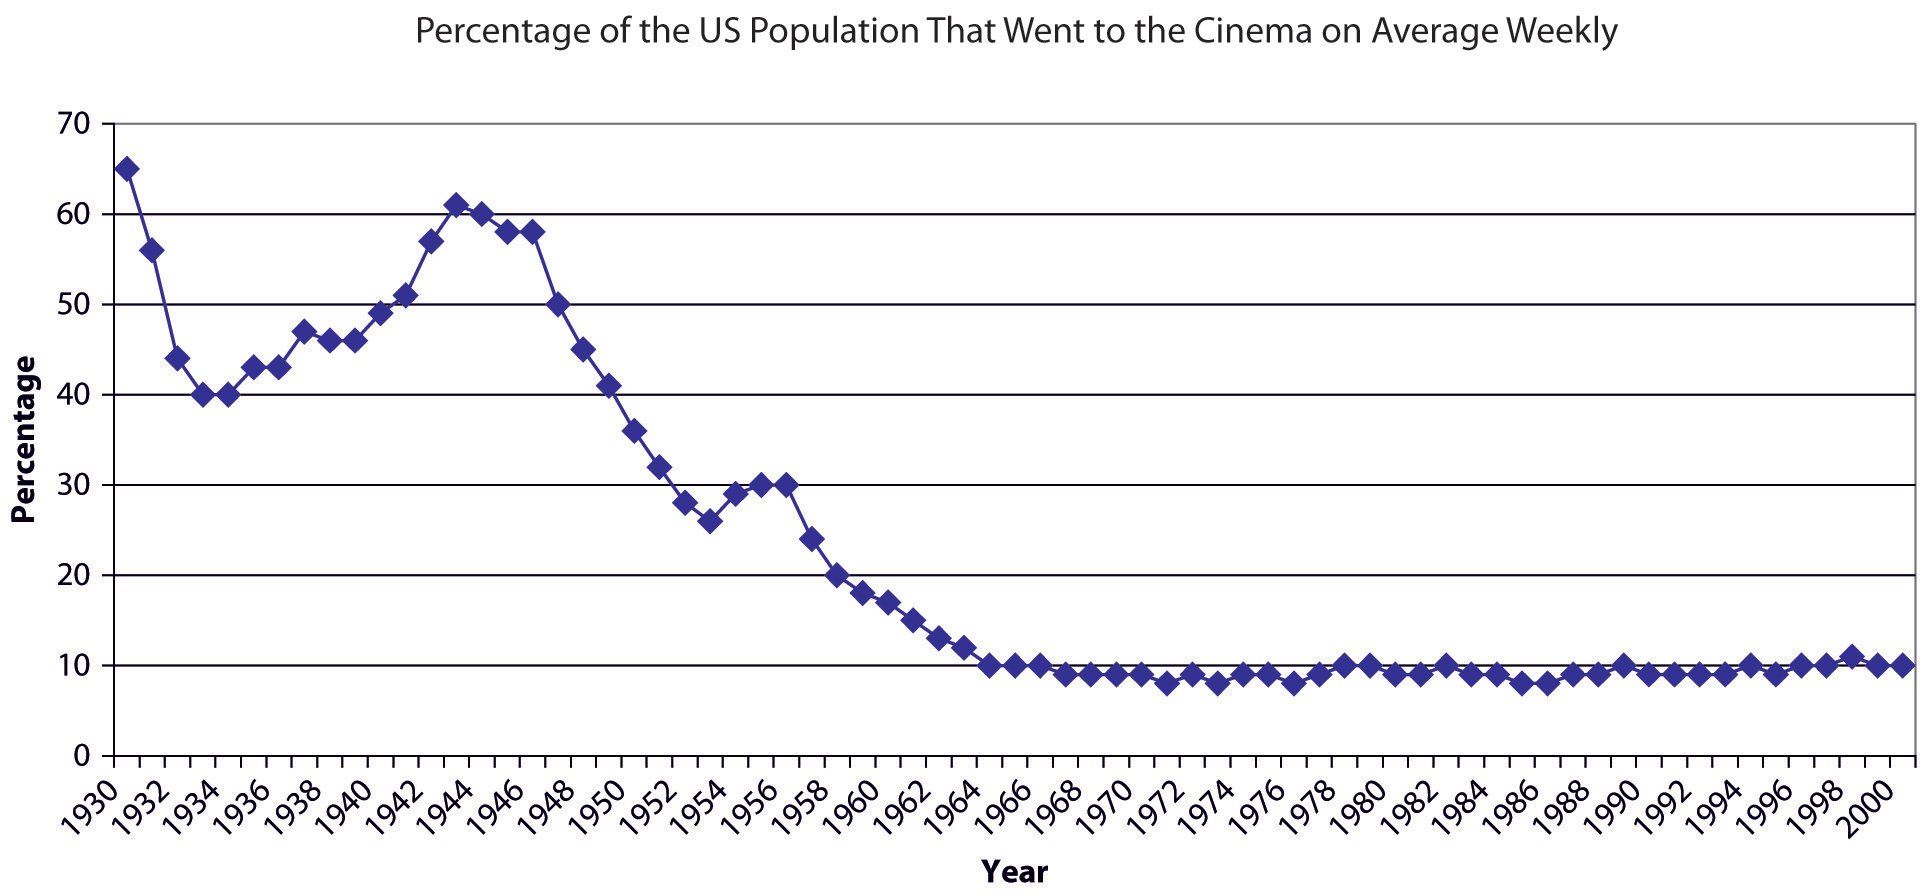 Average weekly cinema attendance in the USA from 1930 to 2000